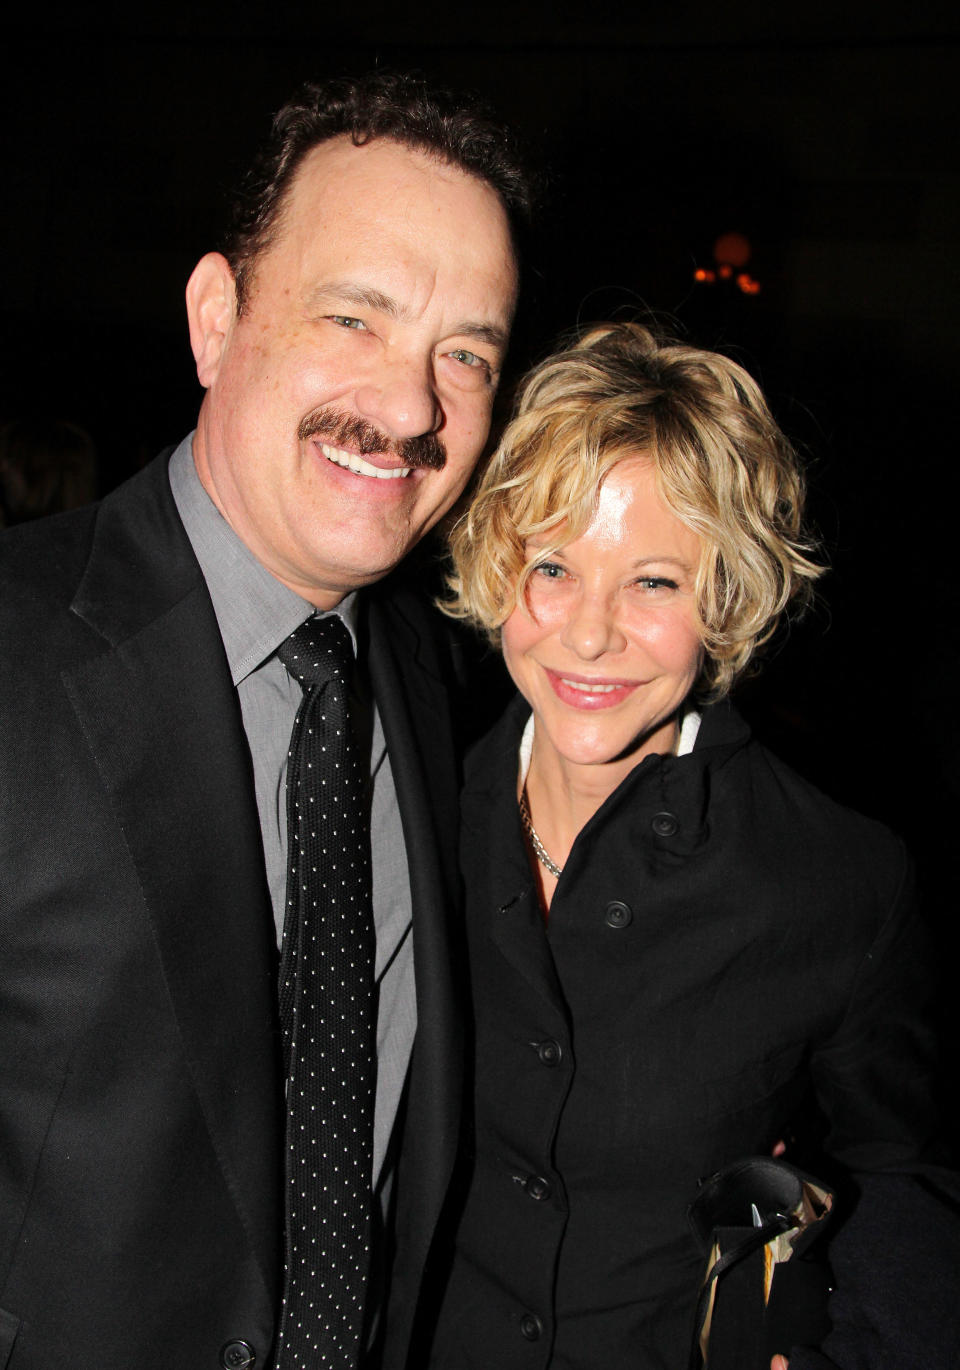 <p>"Sleepless in Seattle" stars Tom Hanks and Meg Ryan posed for a photo opp at the opening night party for Broadway's "Lucky Guy" at Gotham Hall on April 1, 2013 in New York City.&nbsp;</p>